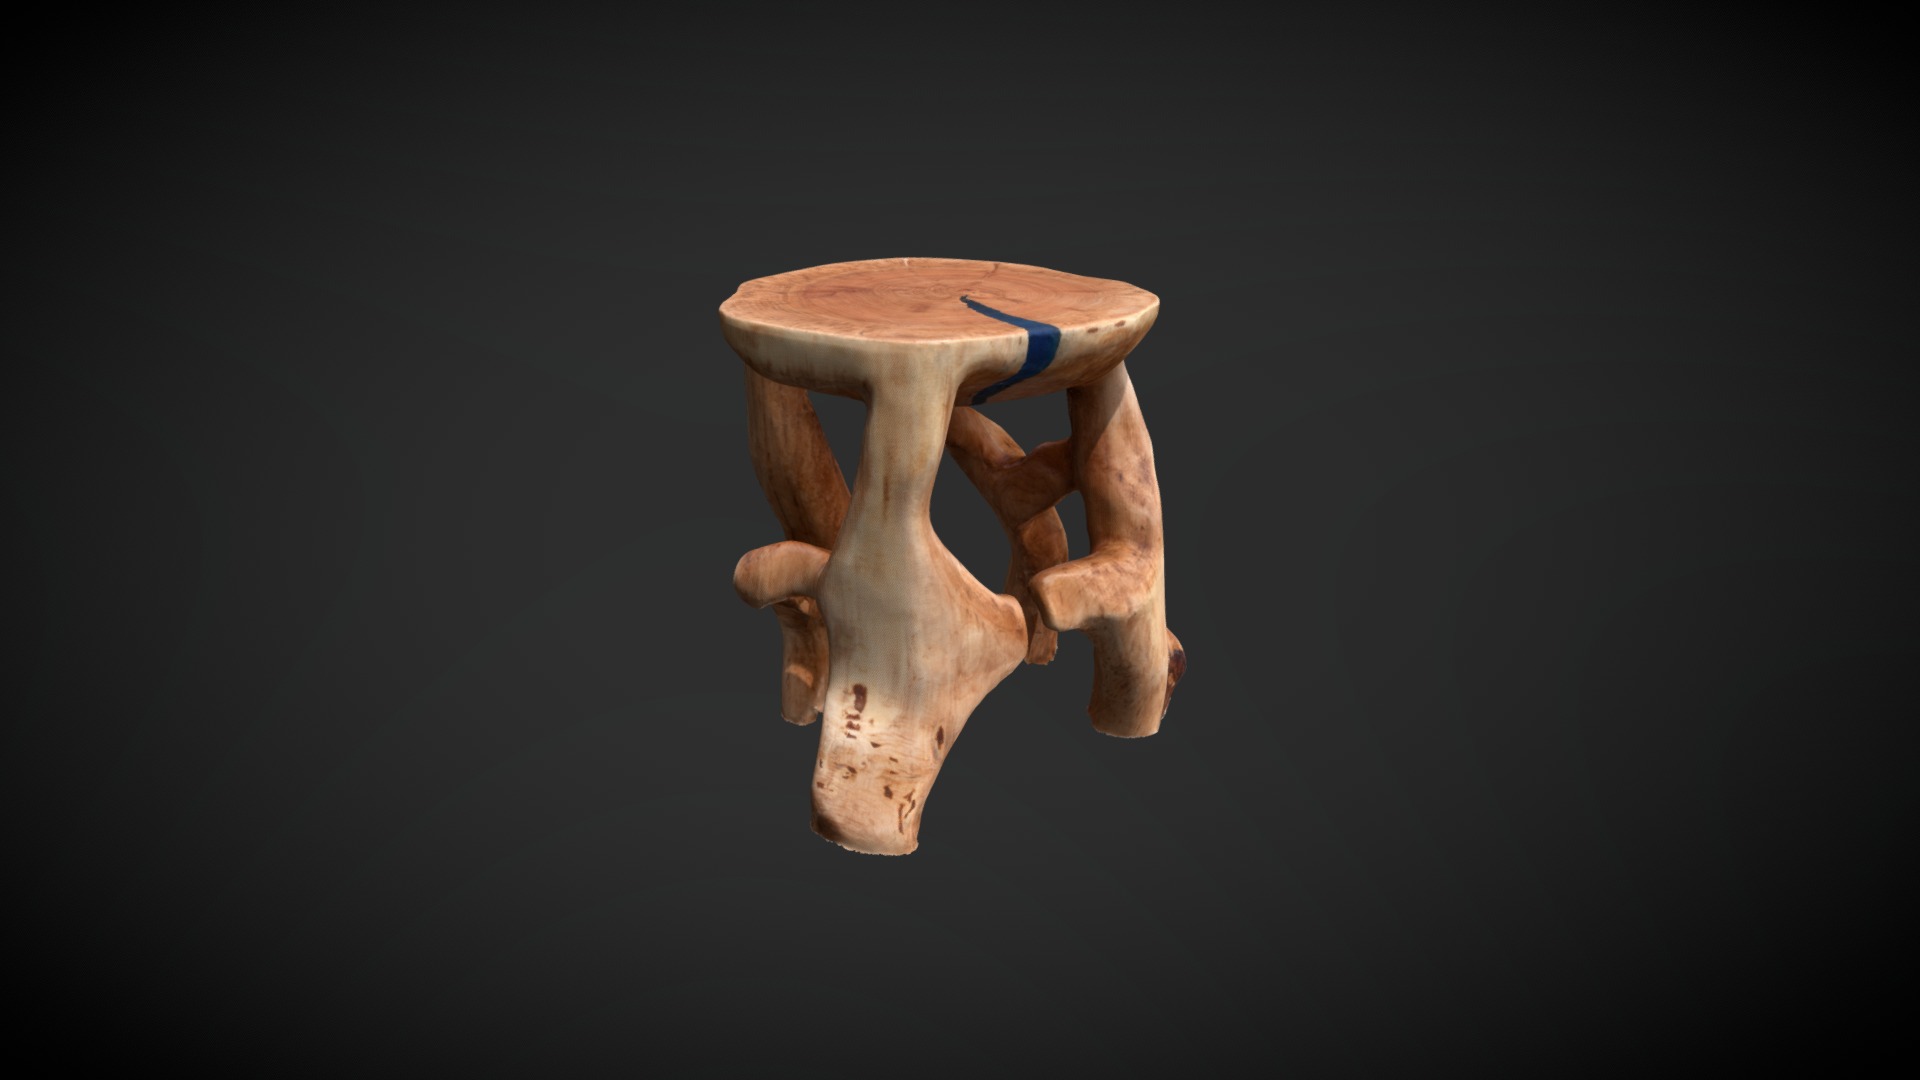 3D model Unique wooden tabouret chair - This is a 3D model of the Unique wooden tabouret chair. The 3D model is about a wooden bowl with a blue handle.